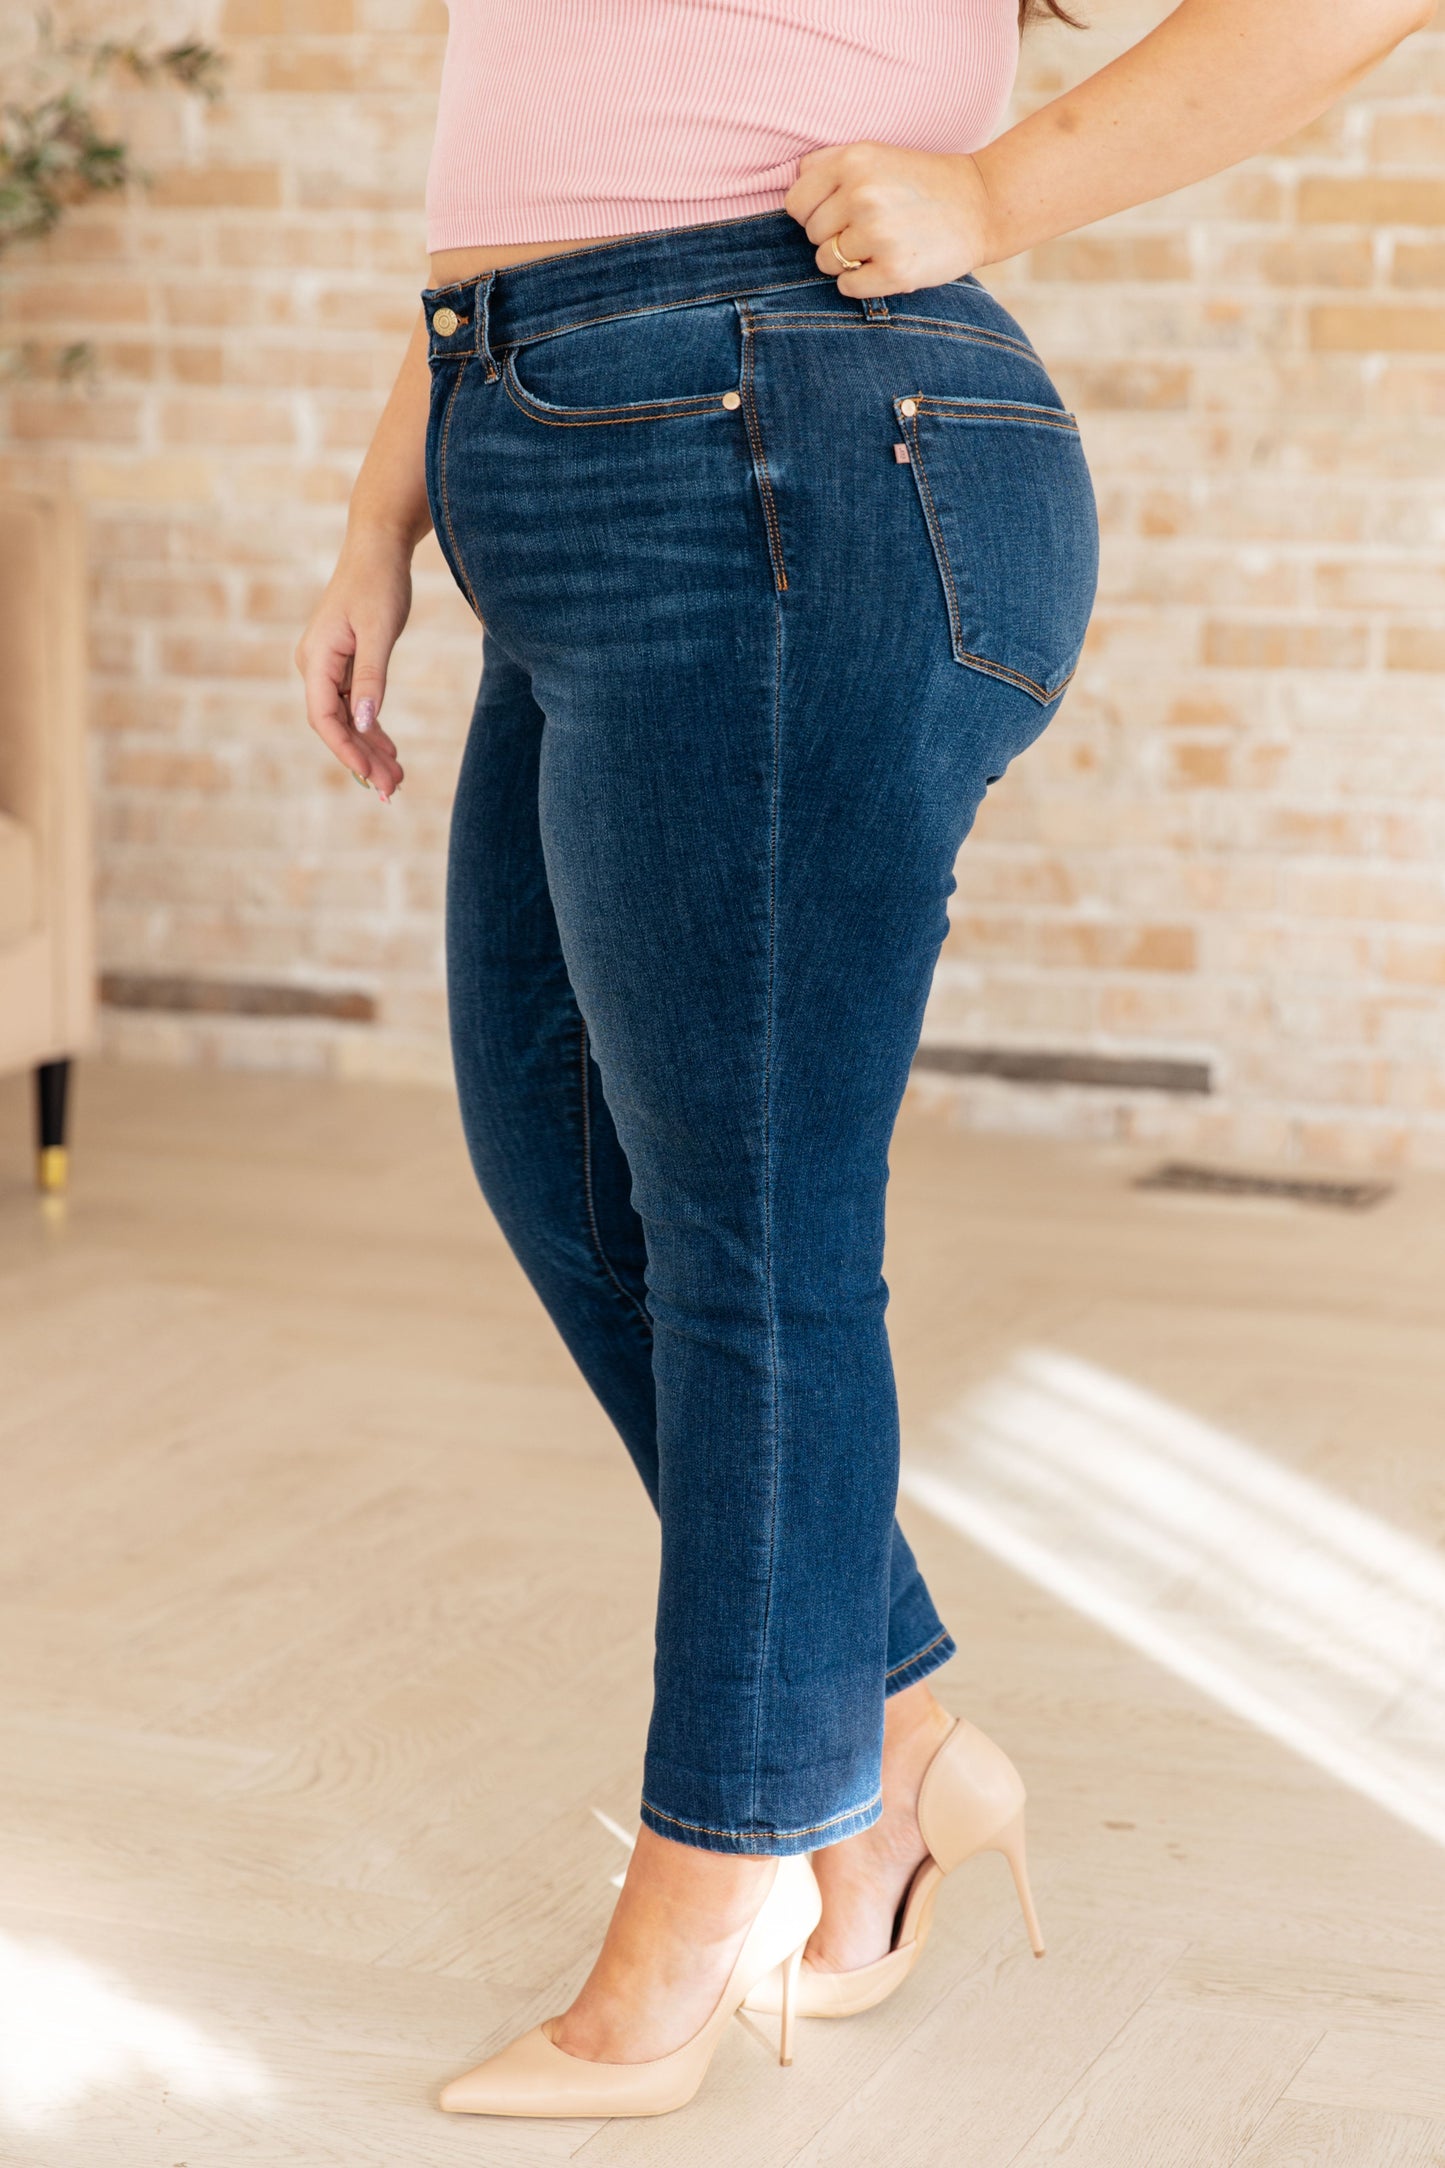 Upgrade your denim game with our Bette Mid Rise Vintage Cuffed Skinny Capri from Judy Blue! Enjoy the comfort of 4-way stretch and the timeless look of the dark vintage wash. Optional cuffed hems add a touch of style to this non-distressed, mid-rise jean. Perfect for a modern twist on a classic favorite. 0 -24W